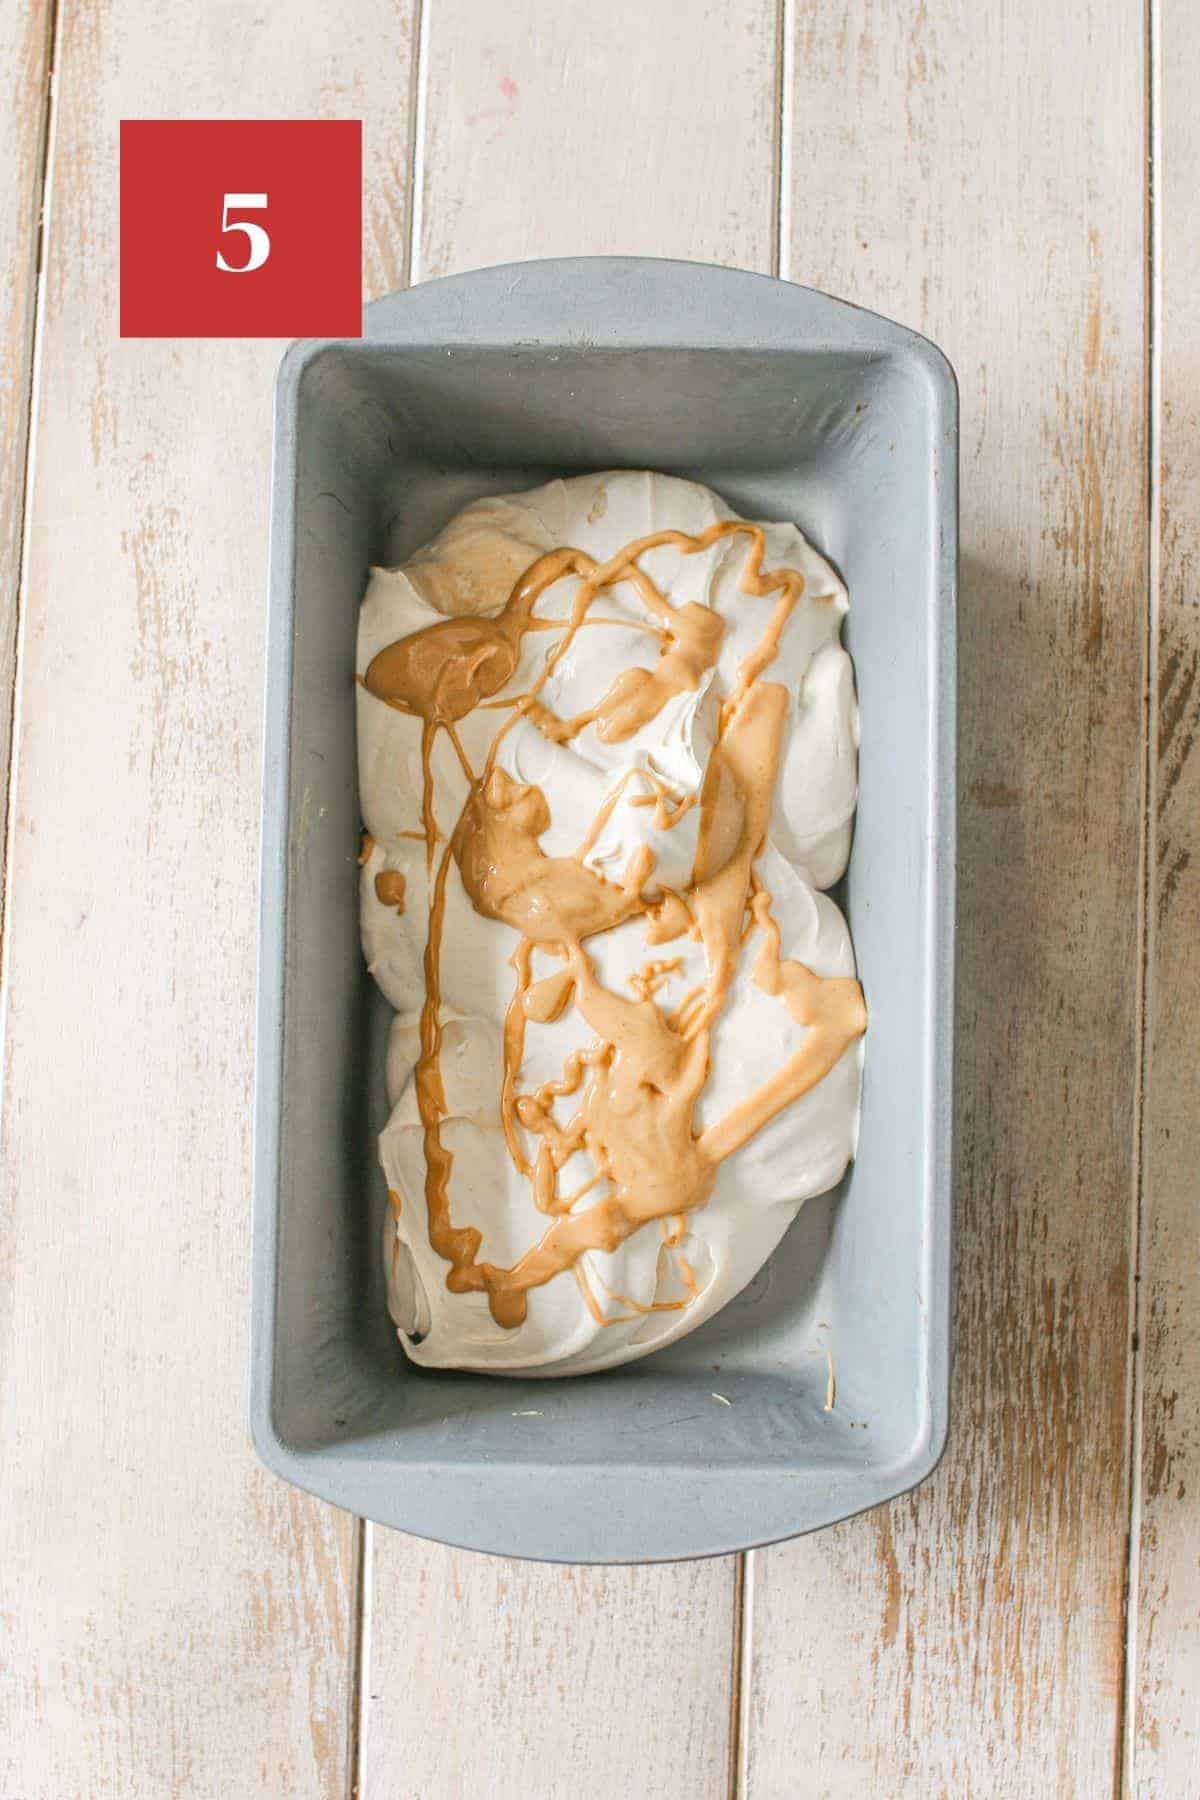 ⅓ of the no churn peanut butter ice cream in a metal loaf pan with melted peanut butter on top. The pan sits on a wood plank background. In the upper left corner is a dark red square with a white '5' in the center.